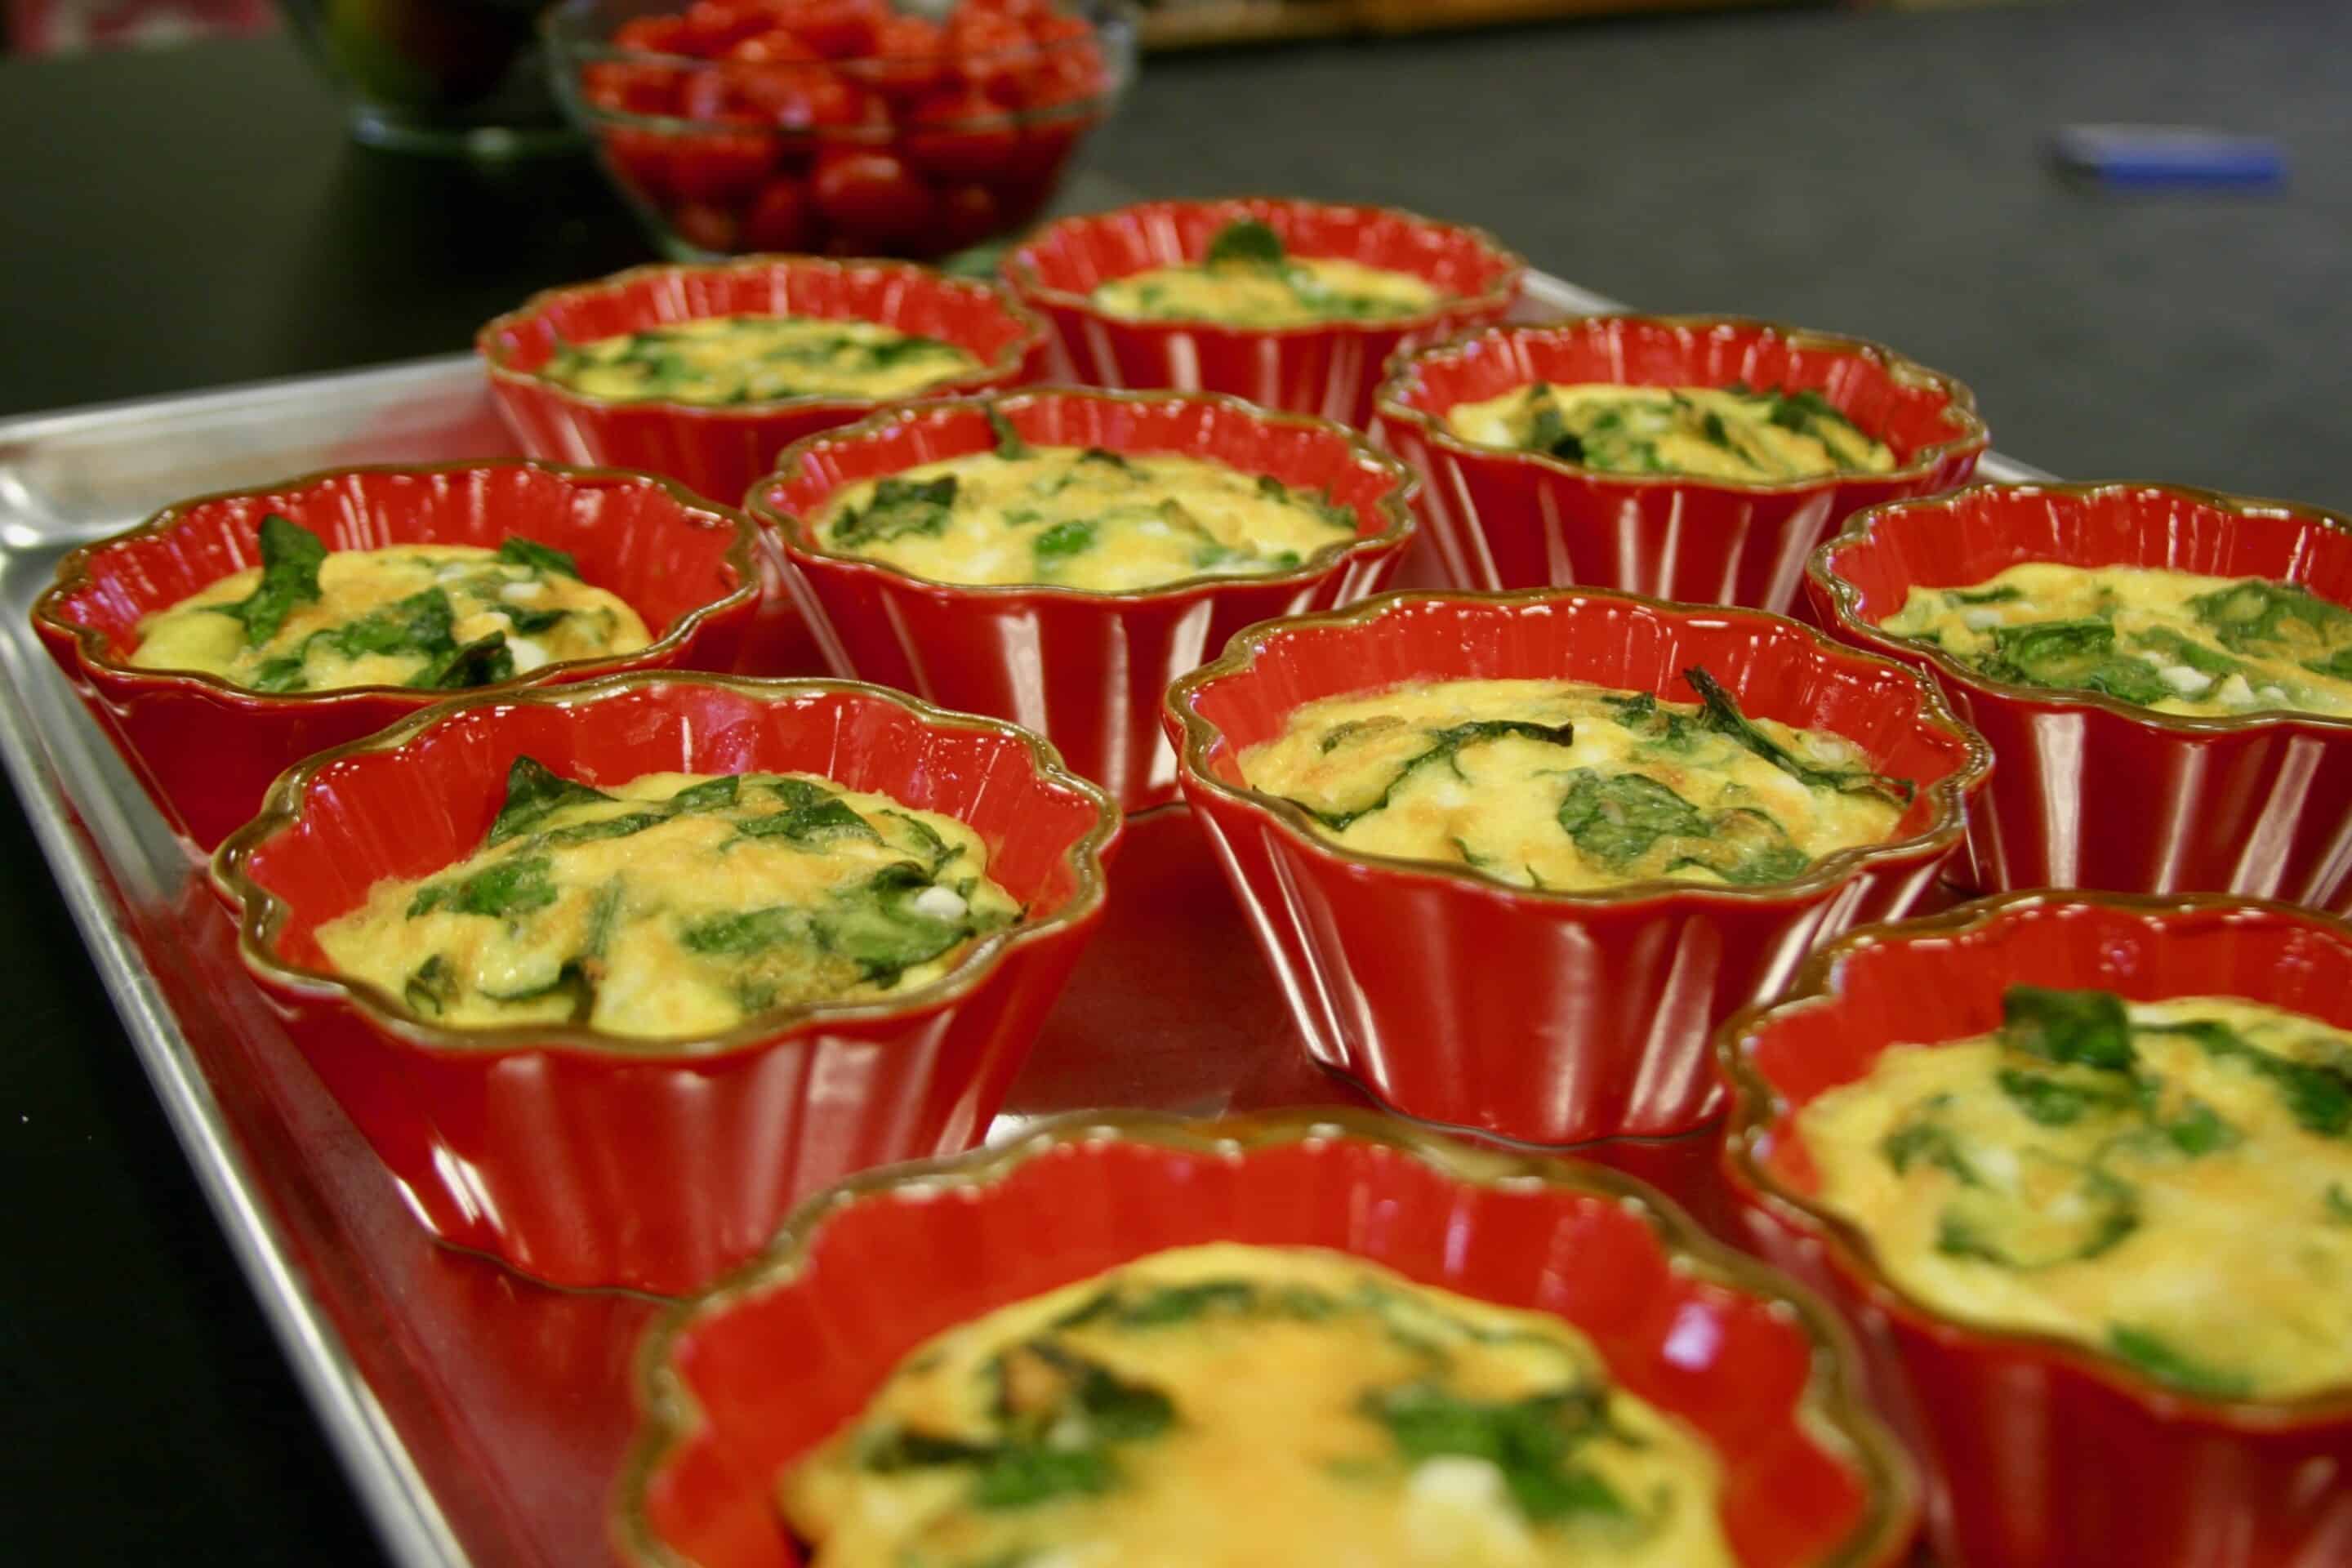 A tray of red bowls filled with quiche.